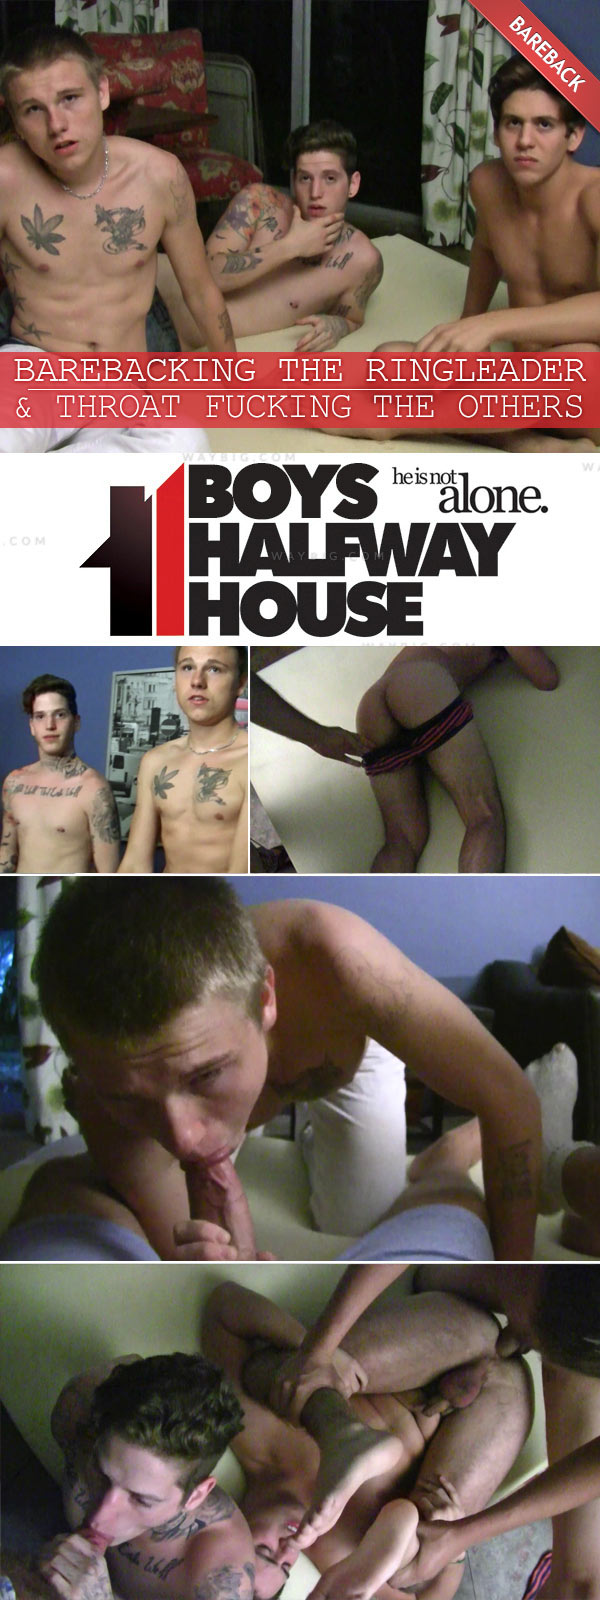 Barebacking the Ringleader and Throat Fucking the Others at Boys Halfway House